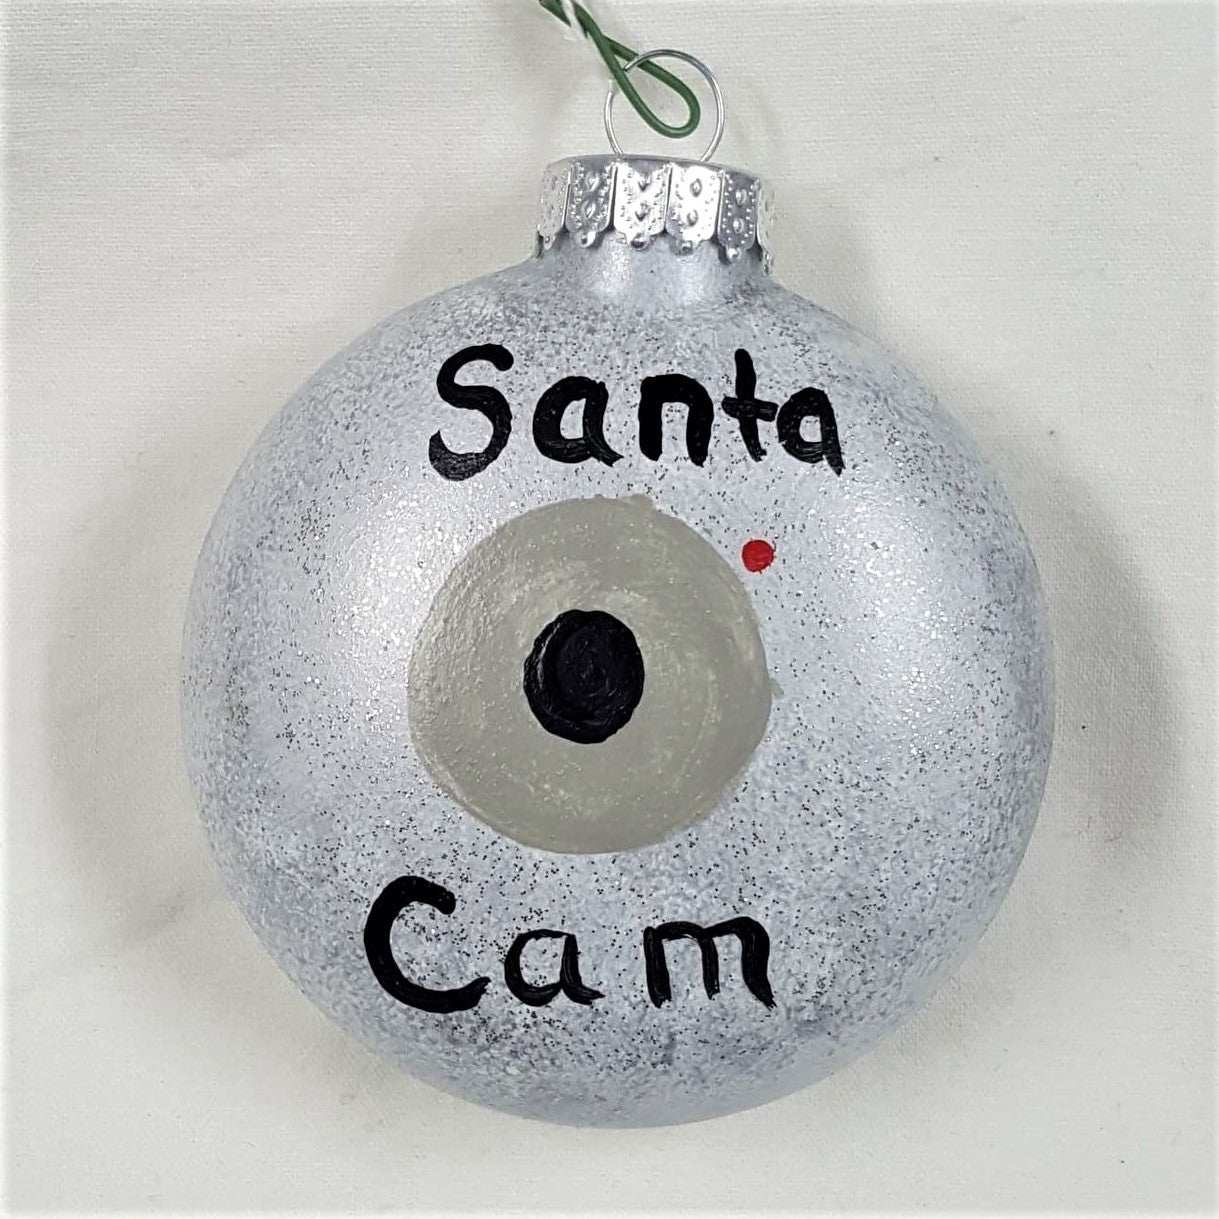 Holiday Ornament, handpainted glass